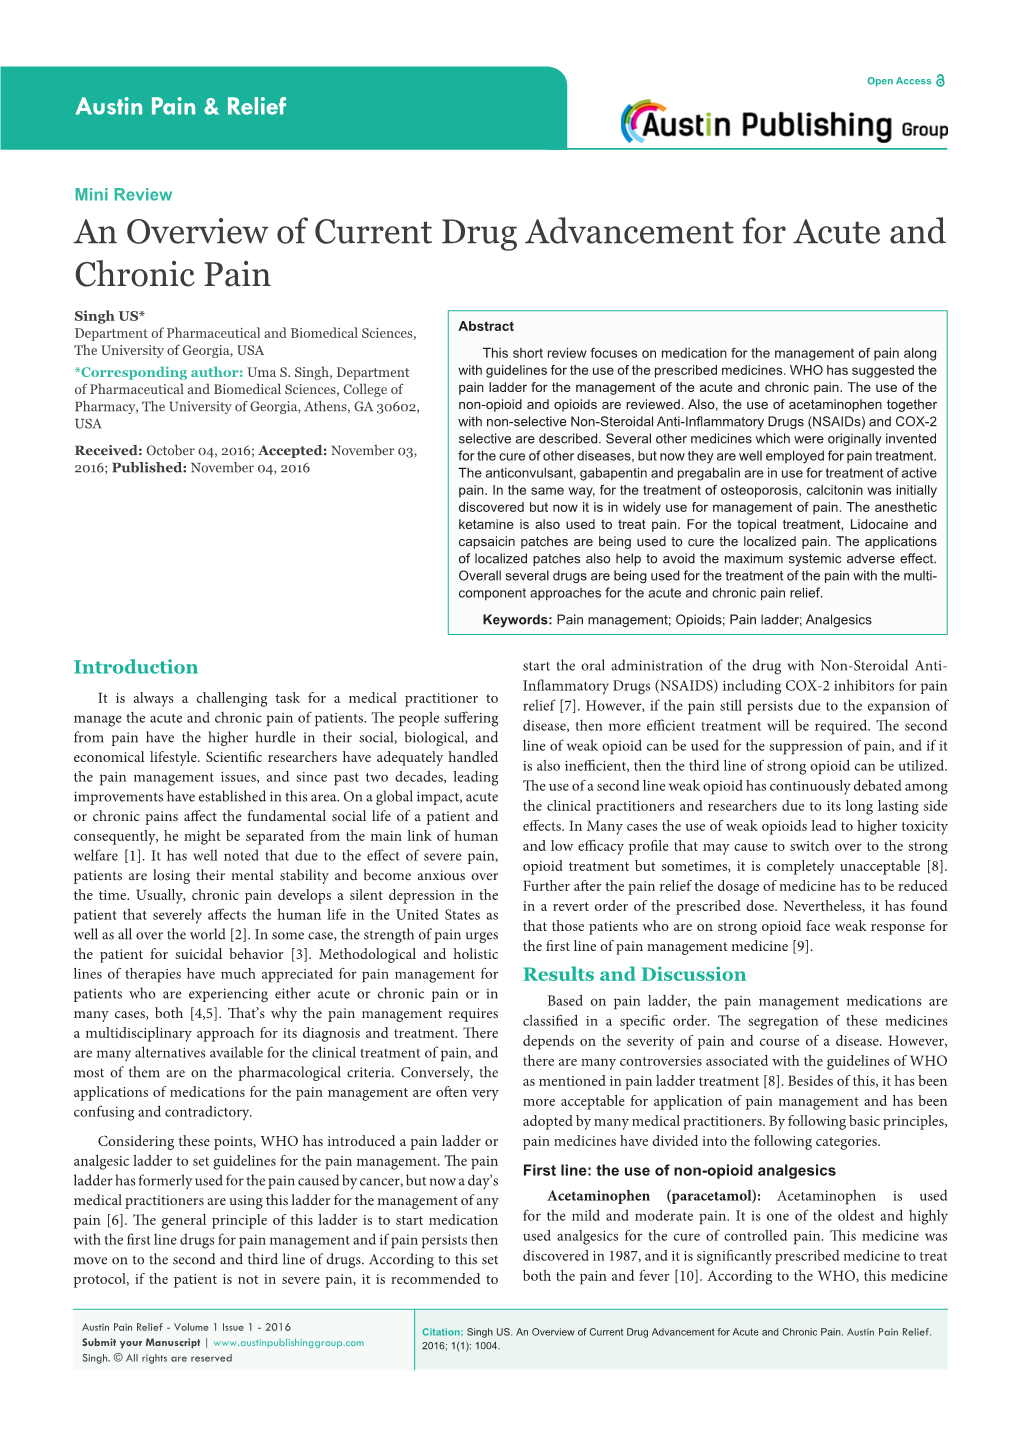 An Overview of Current Drug Advancement for Acute and Chronic Pain